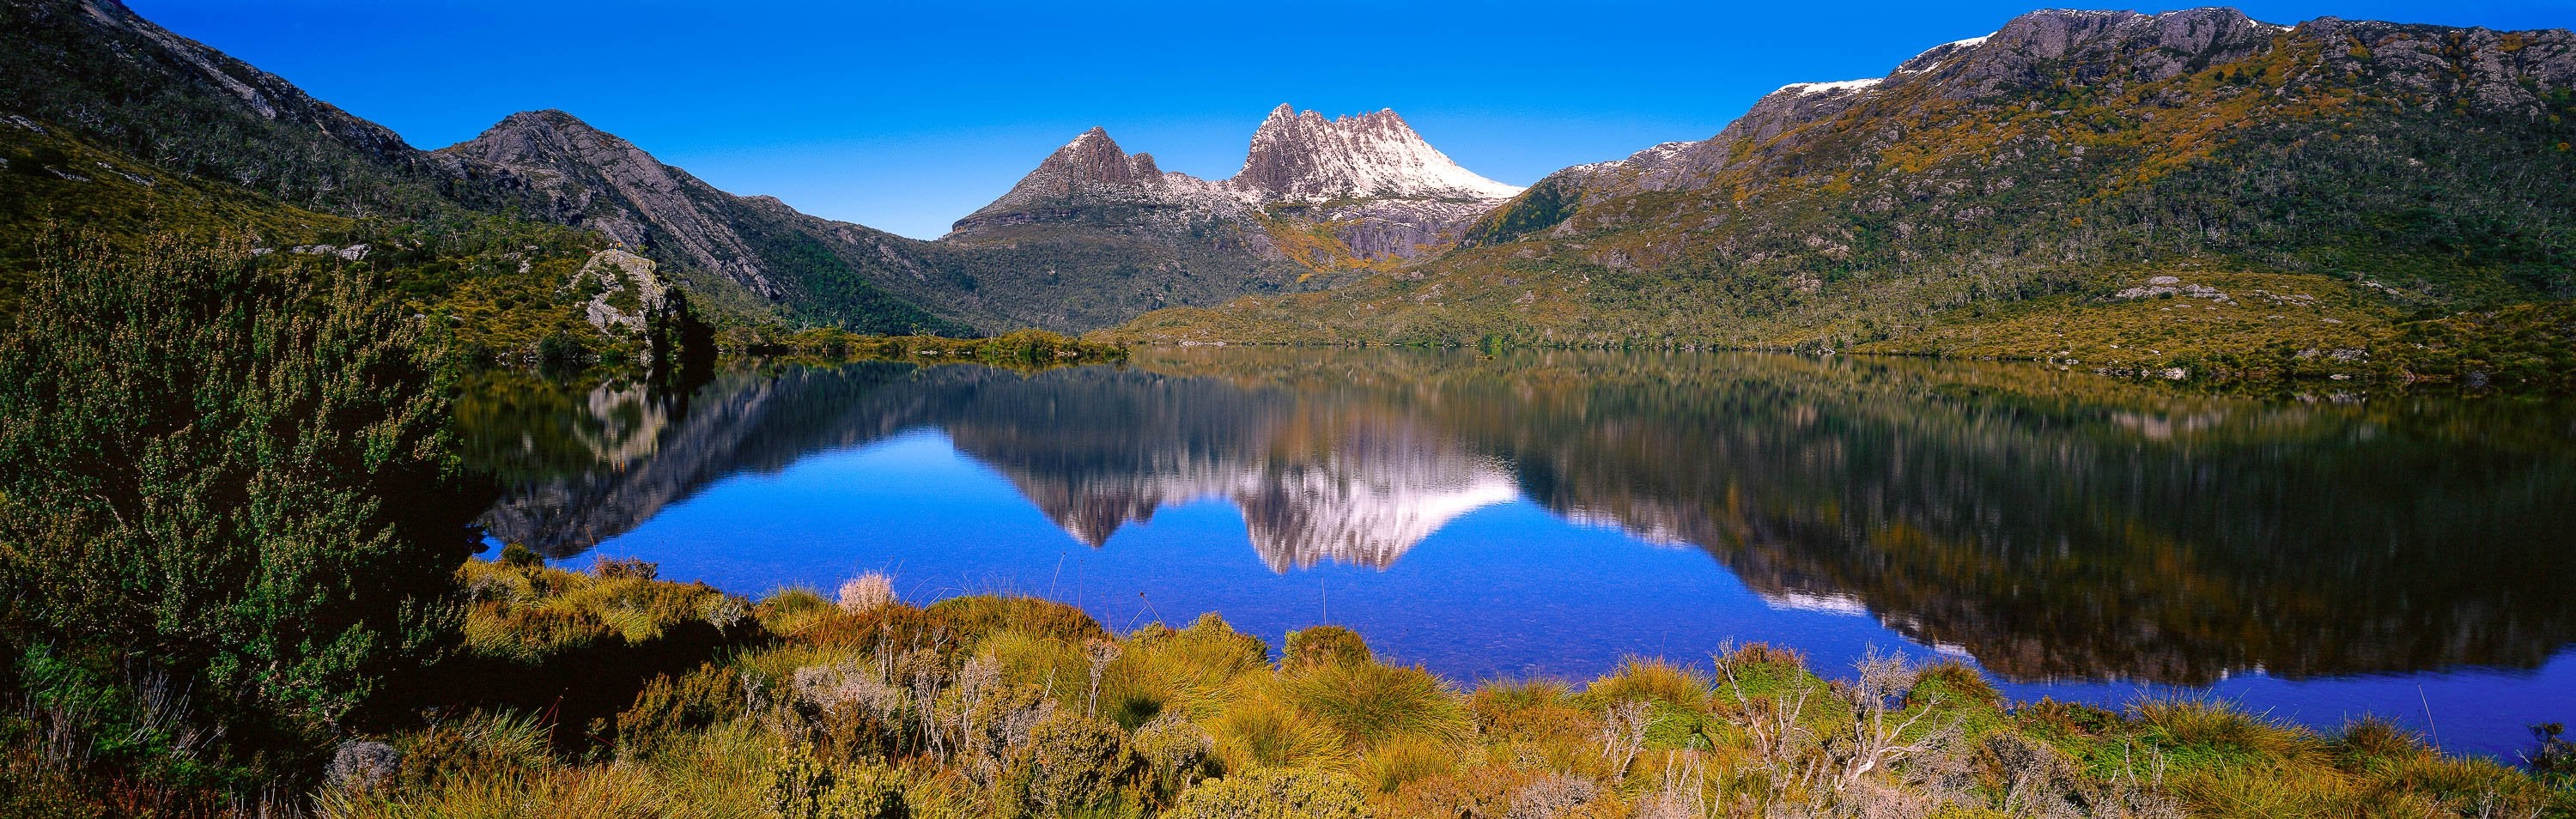 Beautiful mountain walls covered with green grass, and a lake in the center, Perfect Reflection, Cradle Mountain, Tasmania